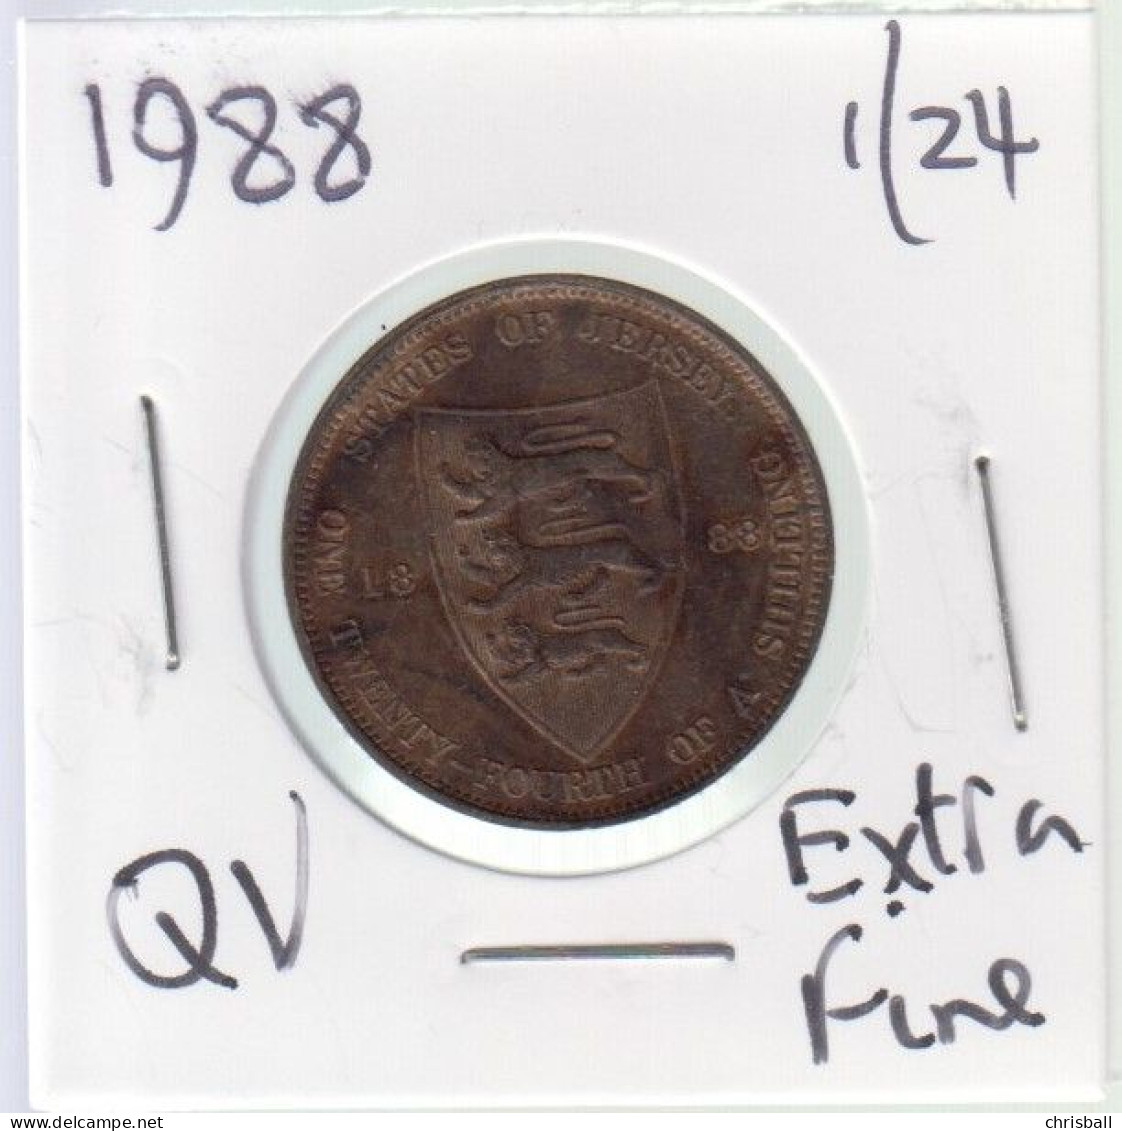 Jersey 1888 Coin Queen Victoria One Twentyfourth Of A Shilling 1/24 Condition Extra Fine - Jersey